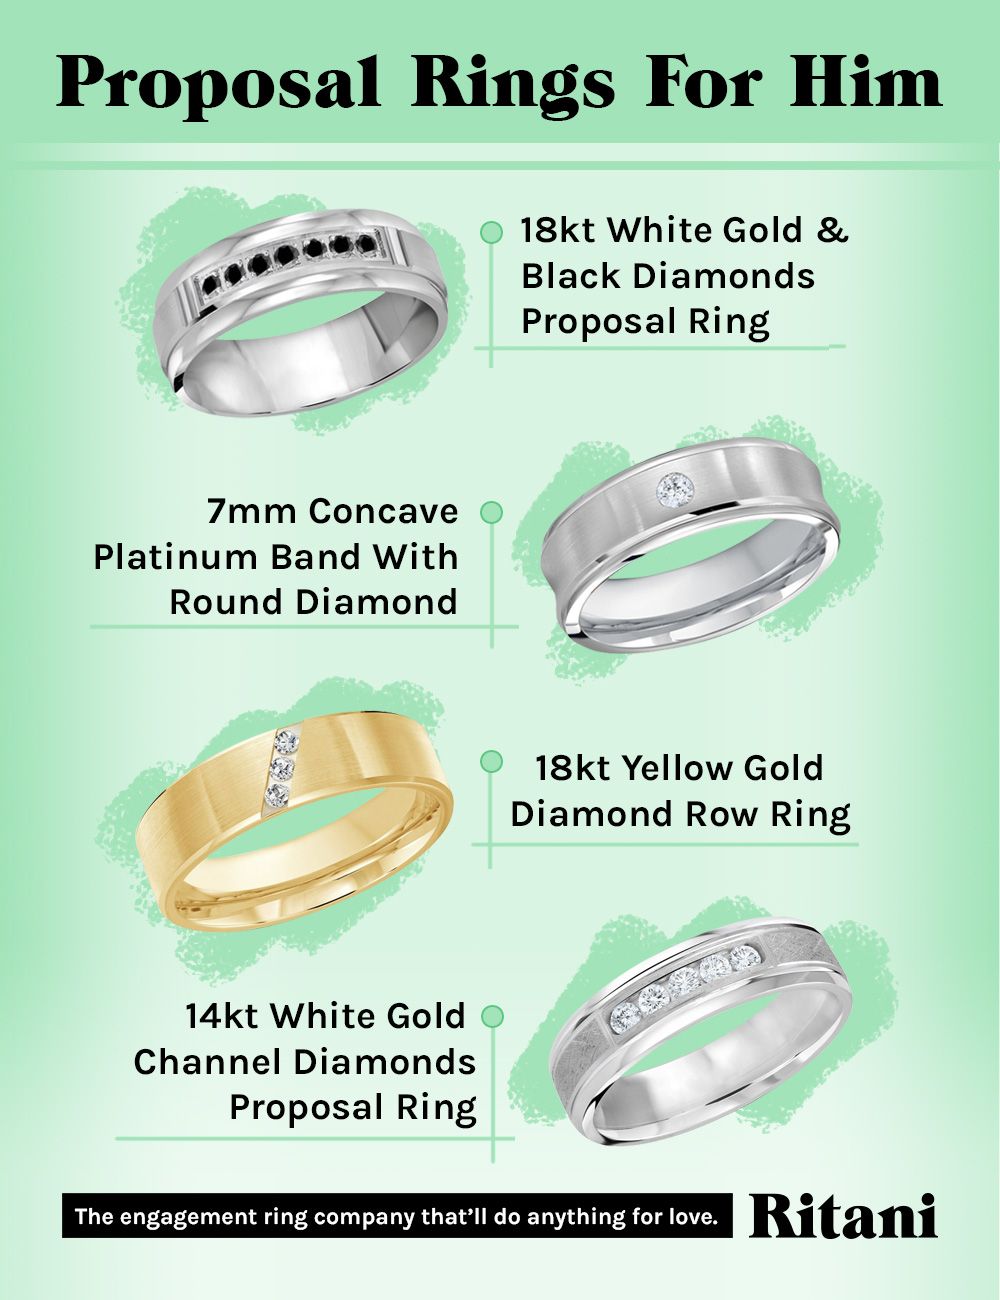 Everything You Need to Know About Proposal Rings | Ritani